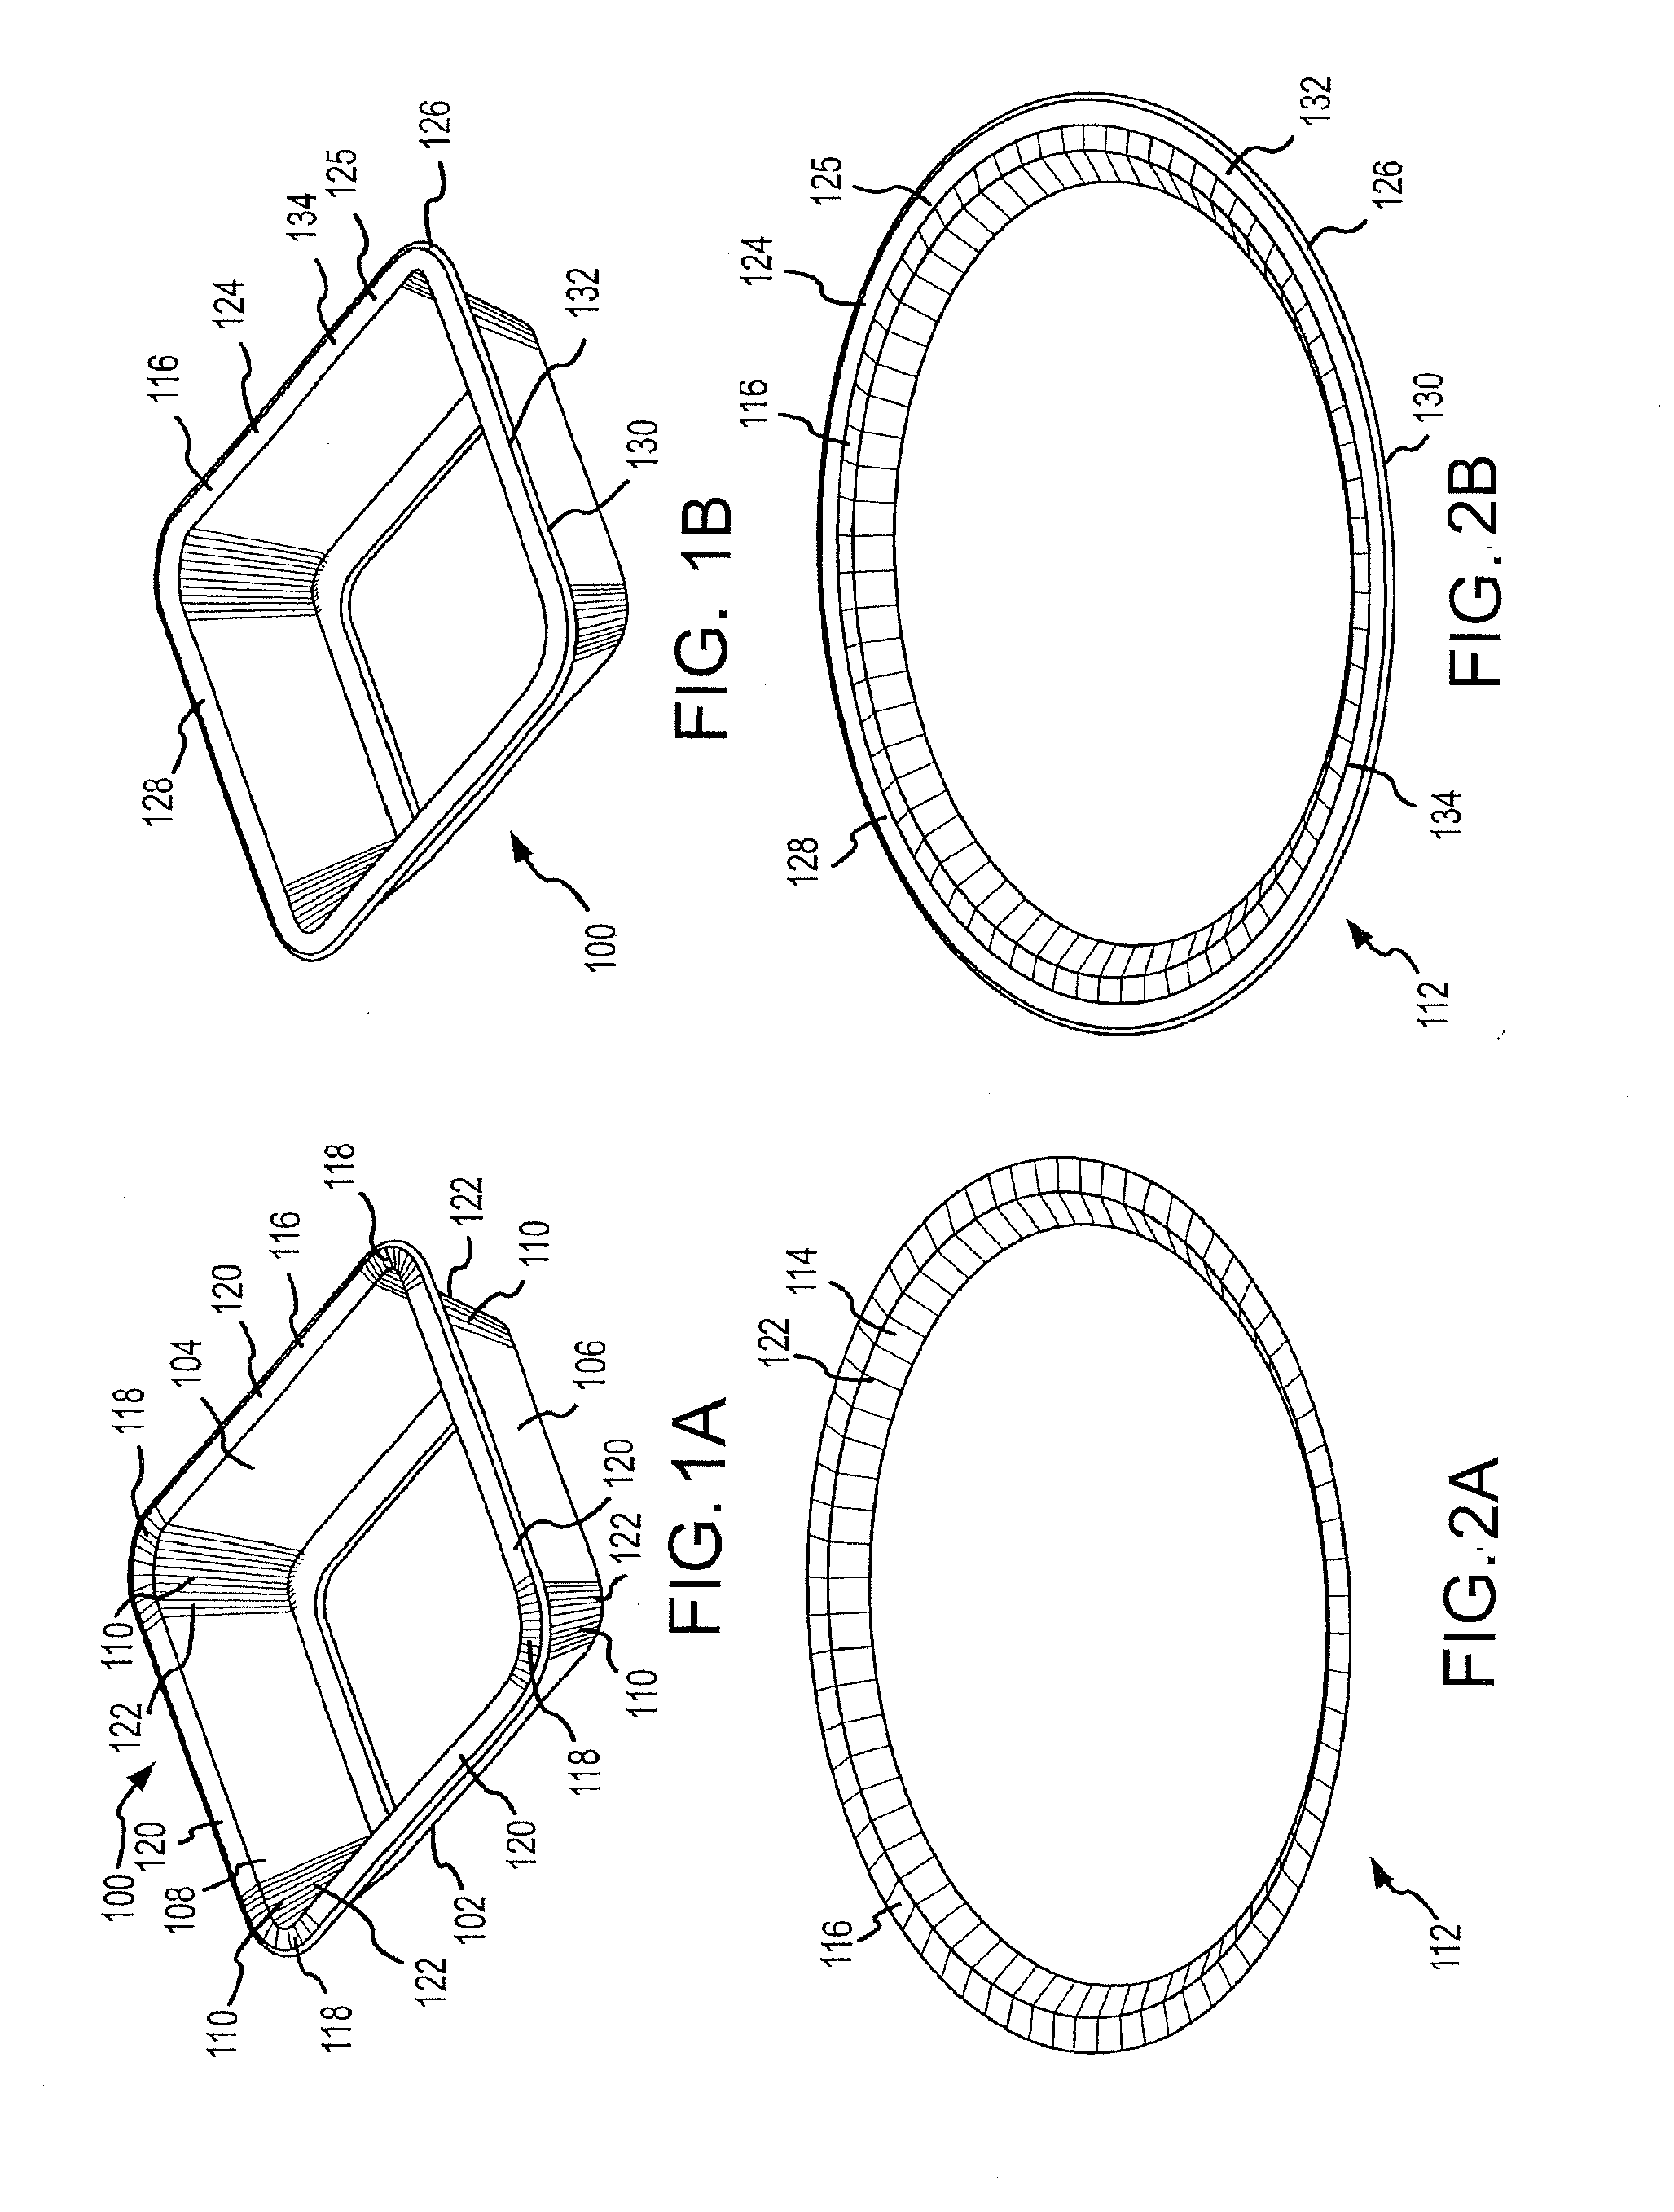 Container having a rim or other feature encapsulated by or formed from injection-molded material